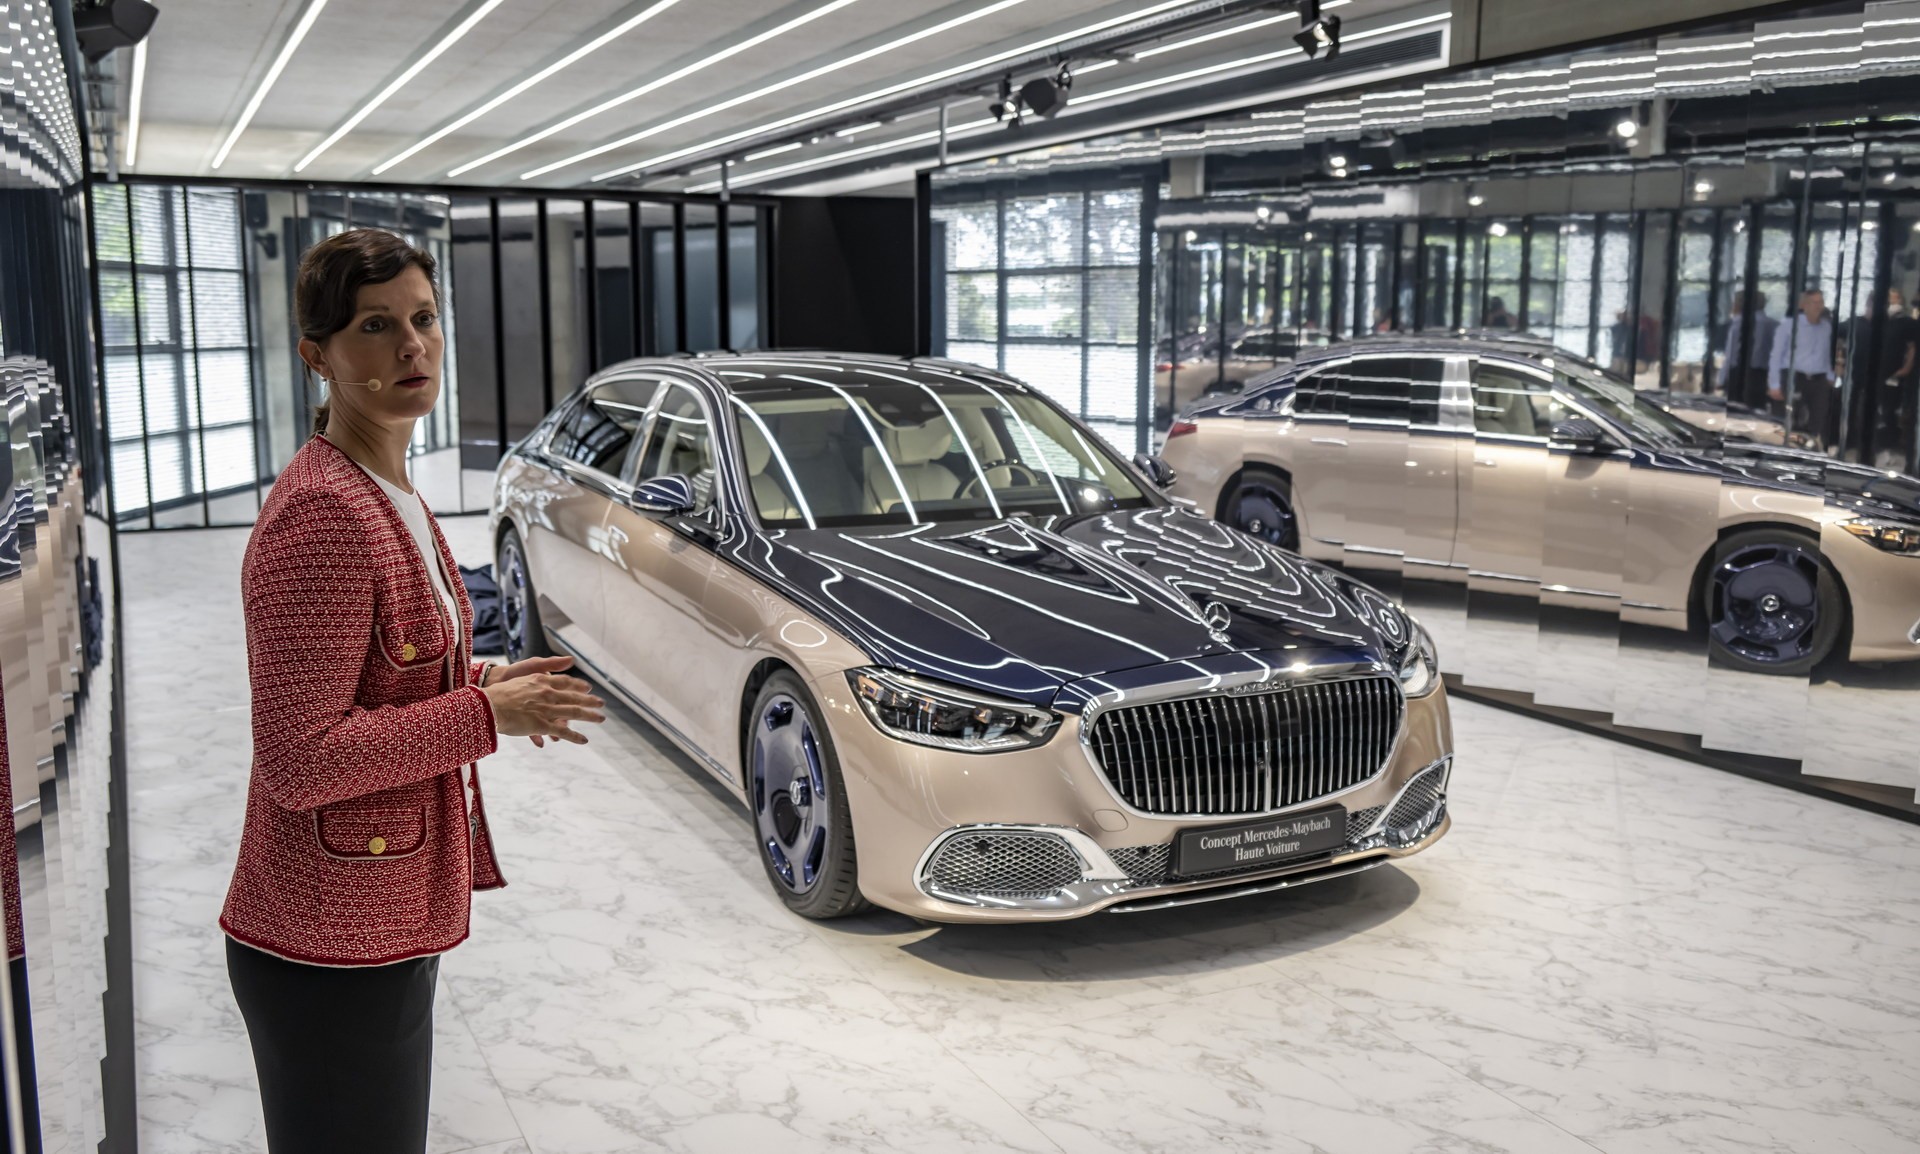 This is the limited-edition Mercedes-Maybach S680 'Haute Couture